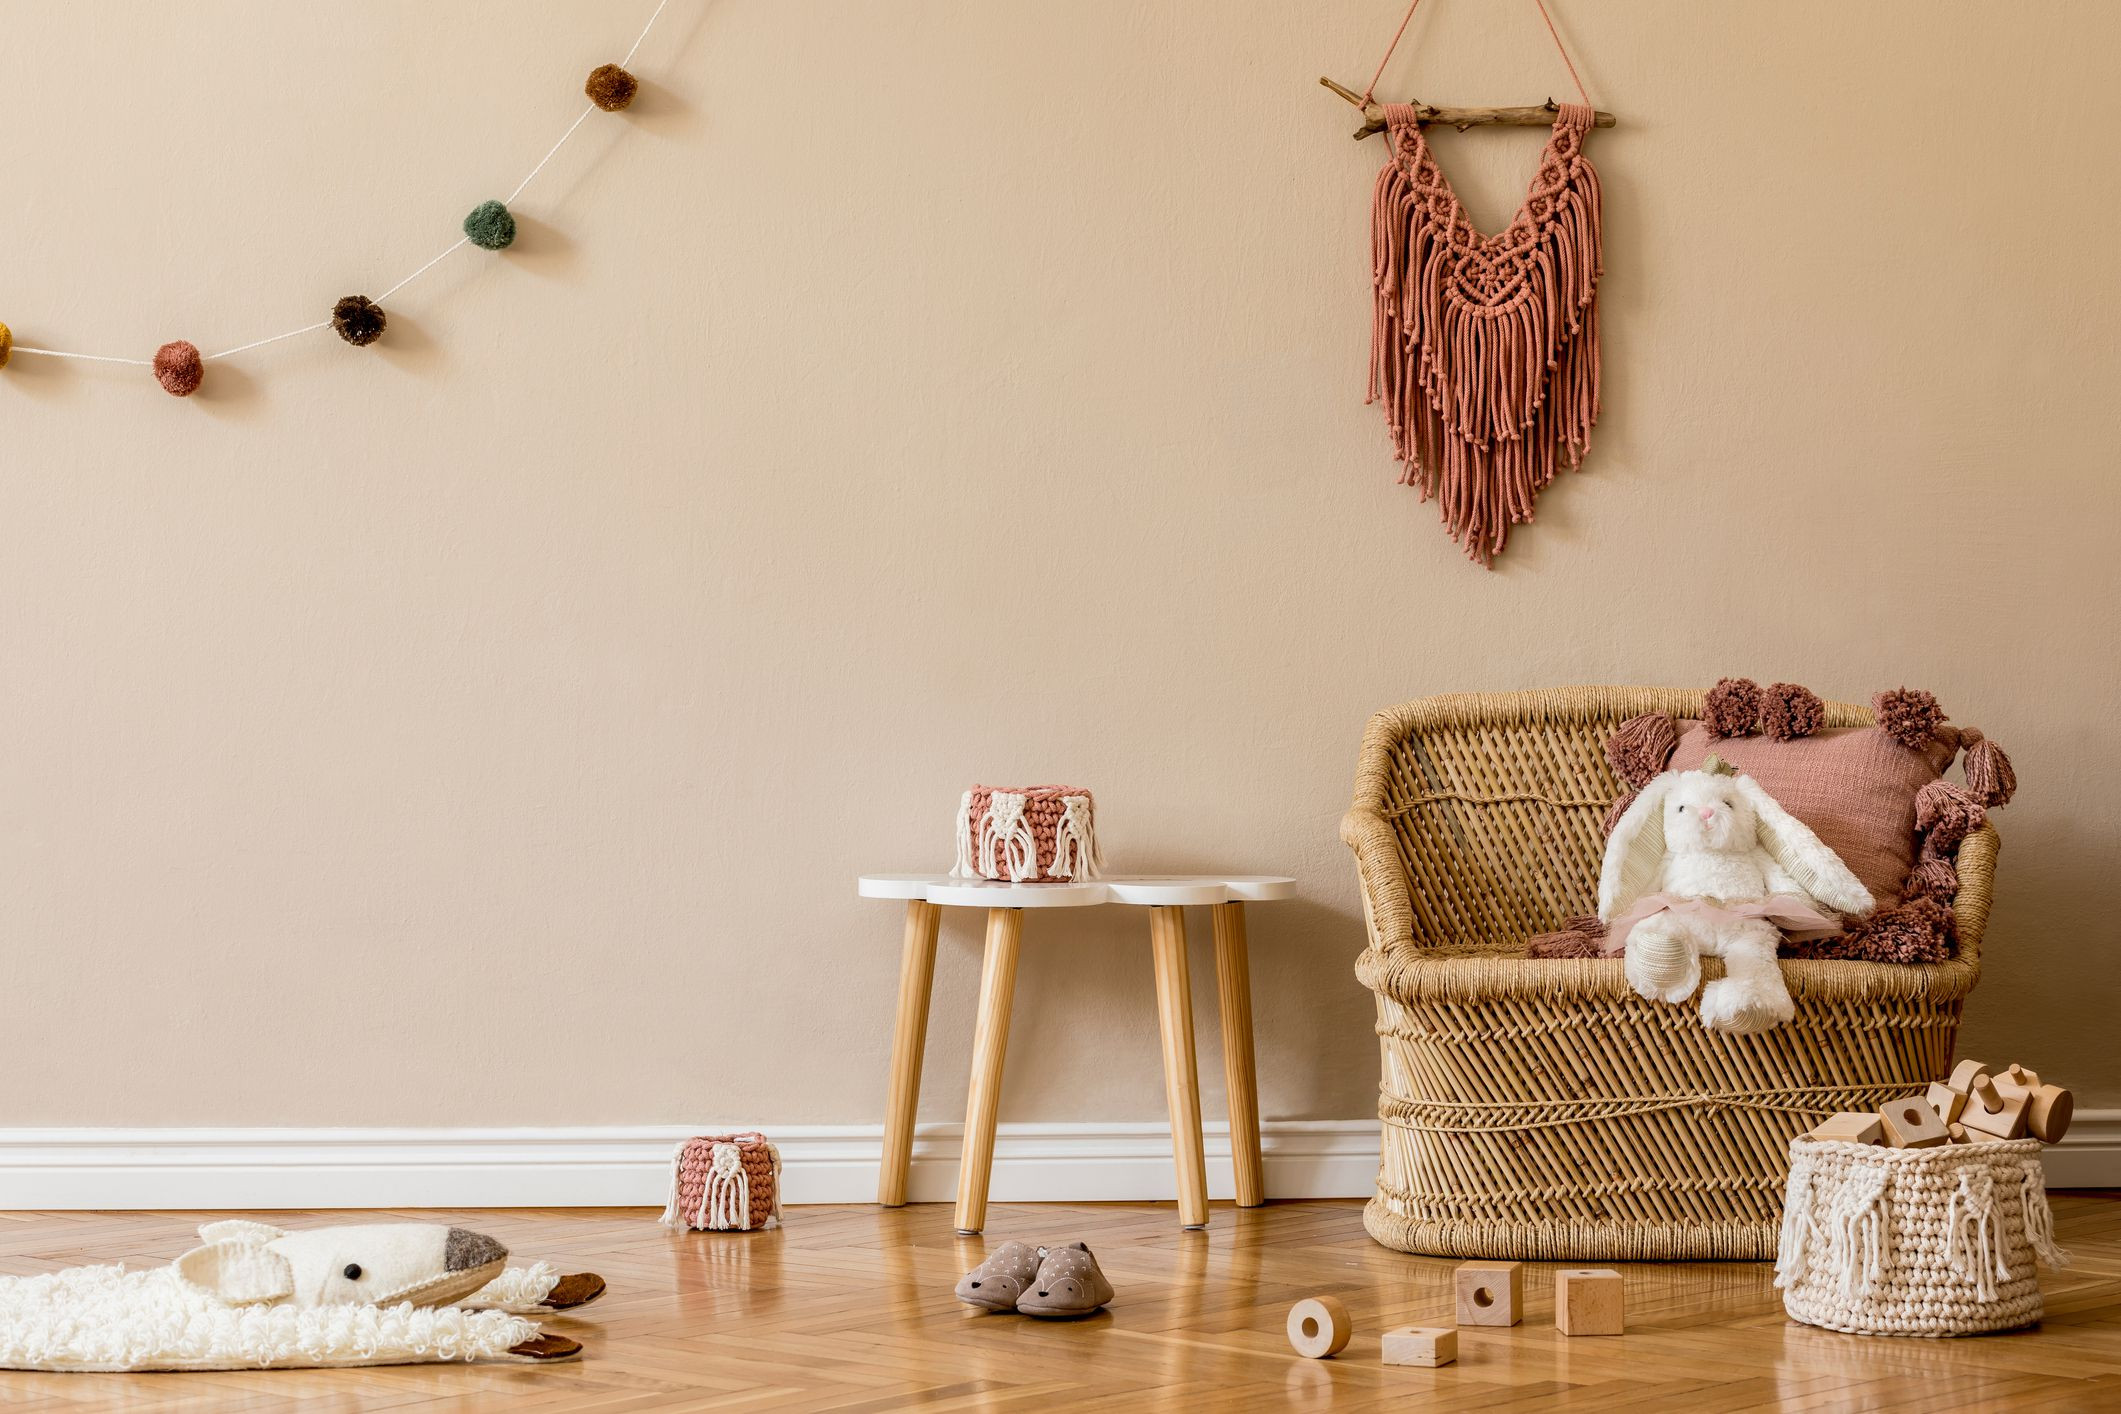 stylish and cute scandinavian decor of newborn baby room with natural toys hanging decor balls macrame pouf plush animals and teddy bears beige walls interior design of kid room home staging 9e f44ad496ca2e694b56a3065a7